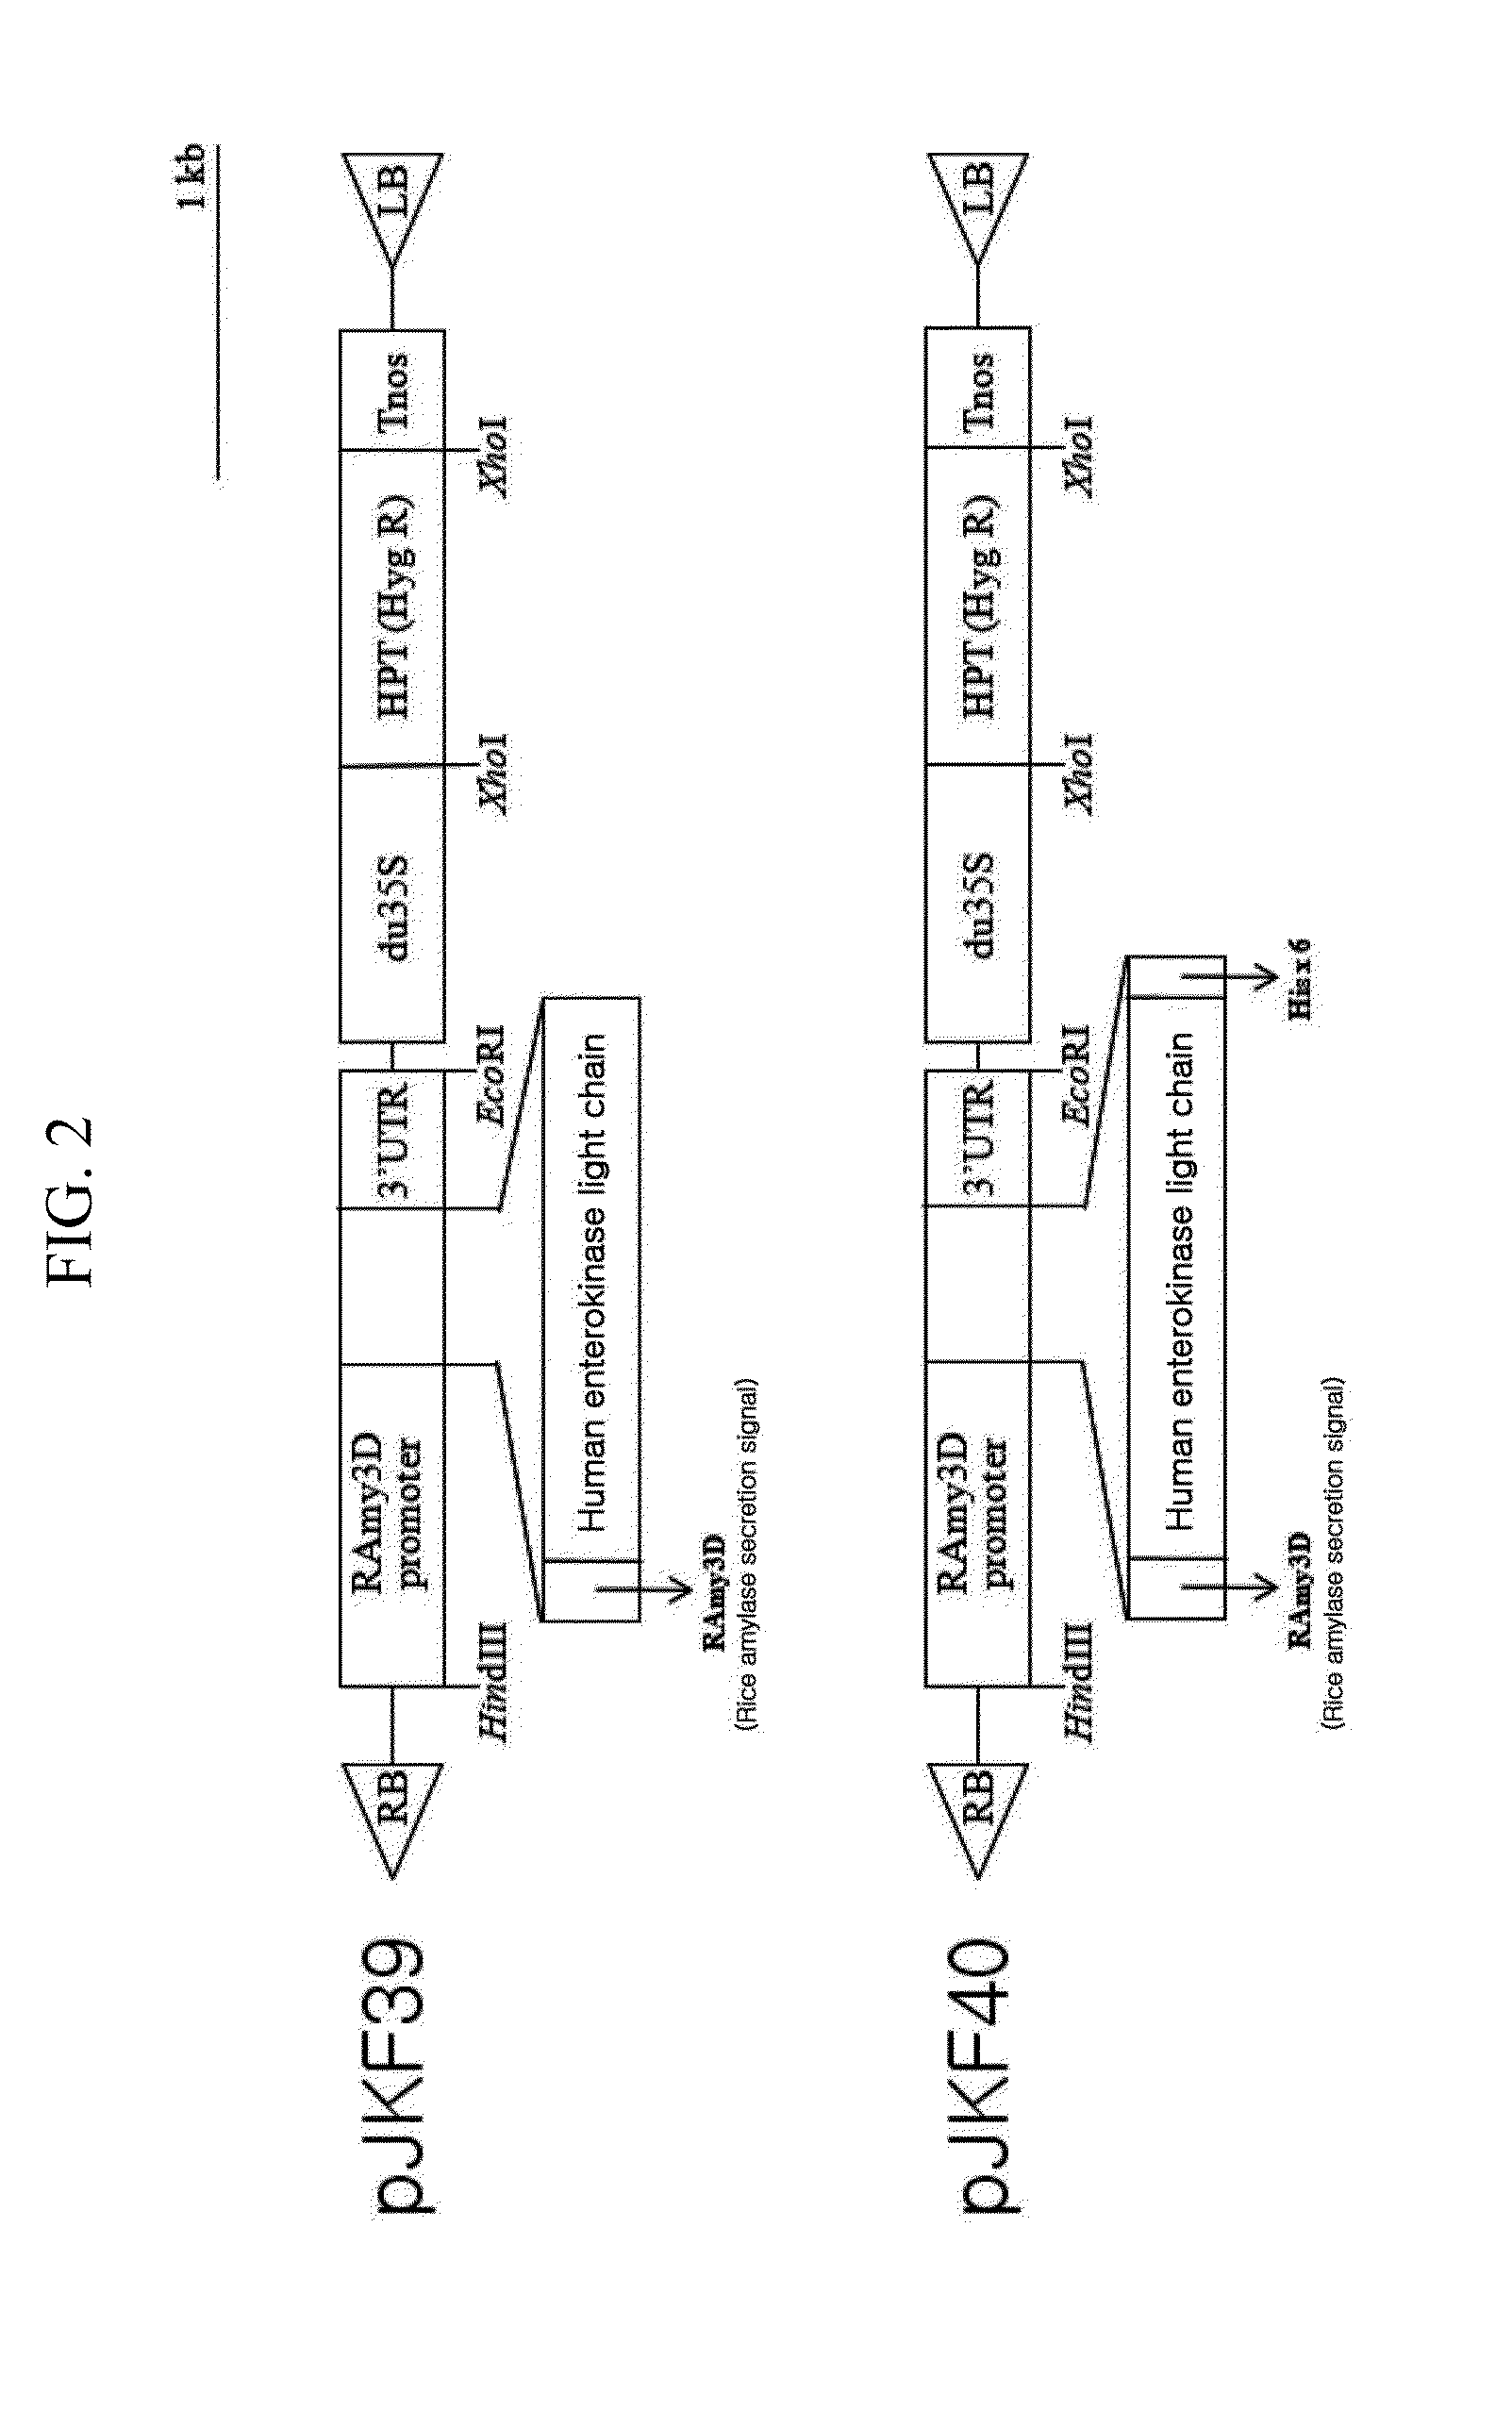 Plant producing human enterokinase light chain protein and uses thereof